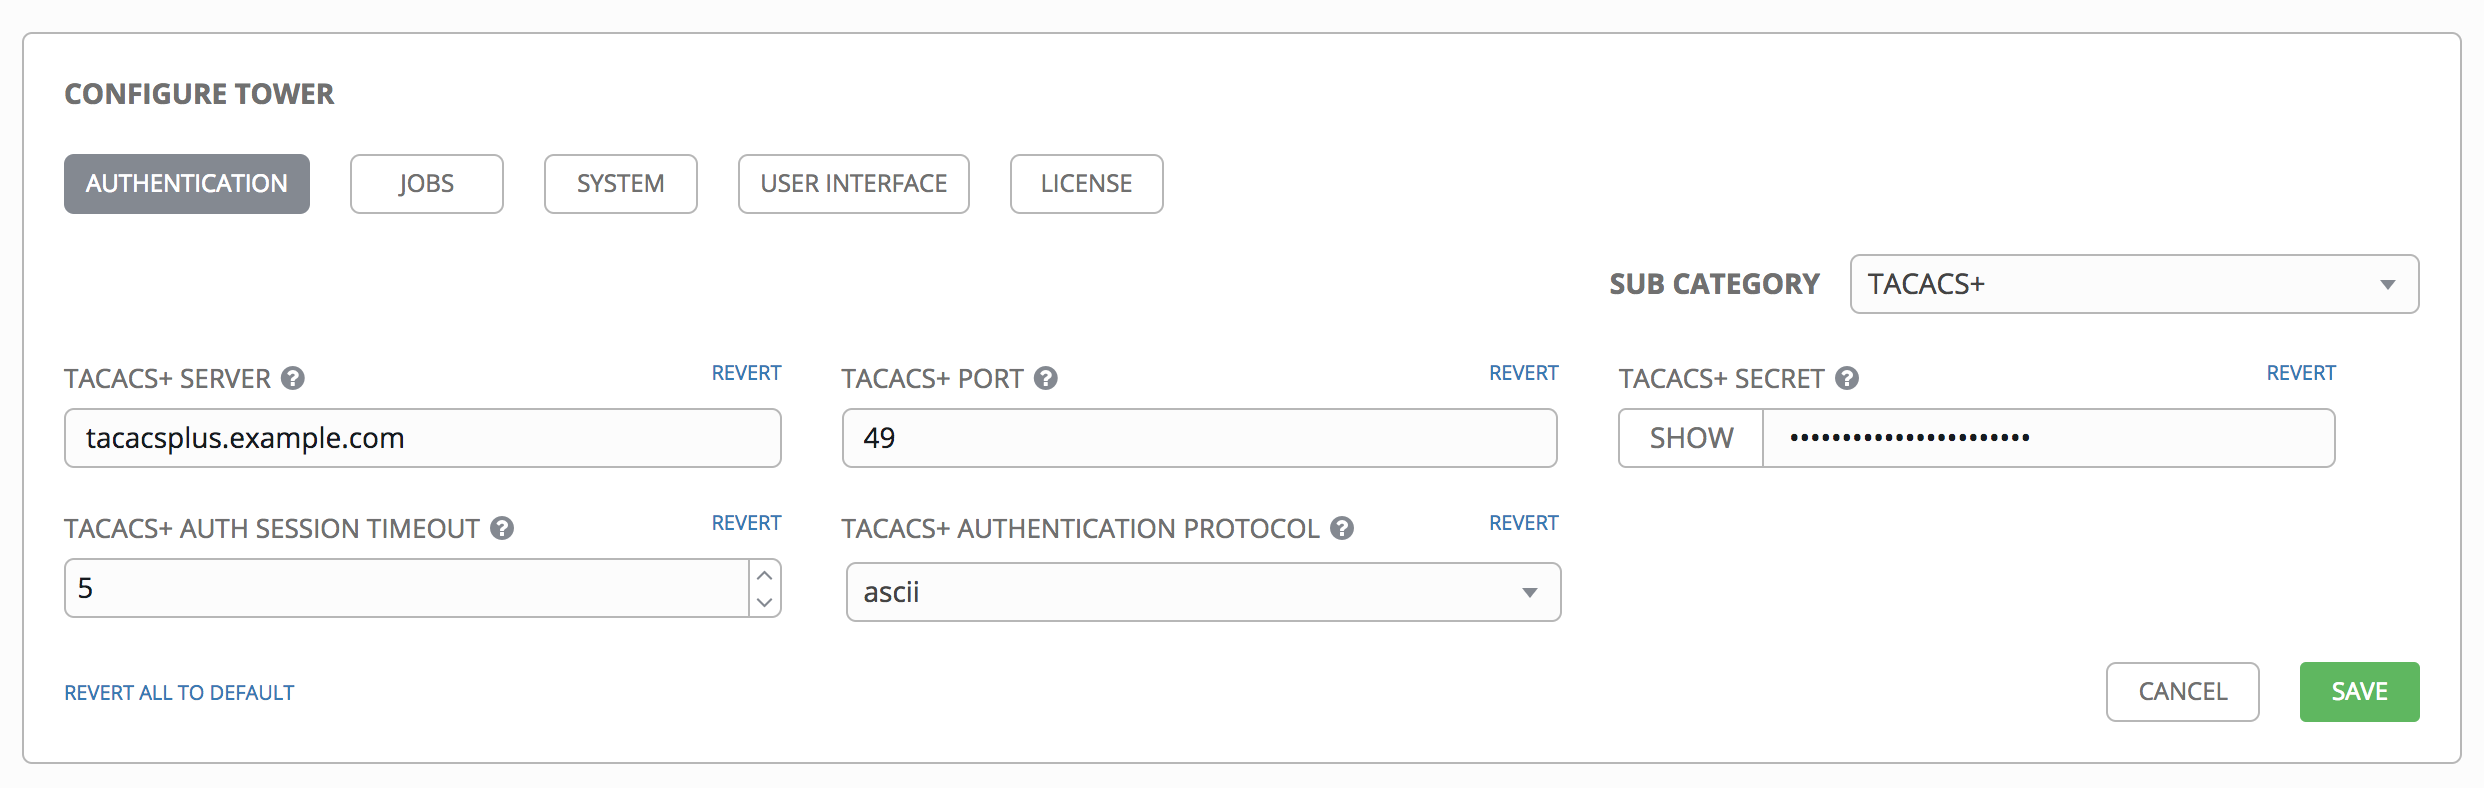 _images/configure-tower-auth-tacacs.png